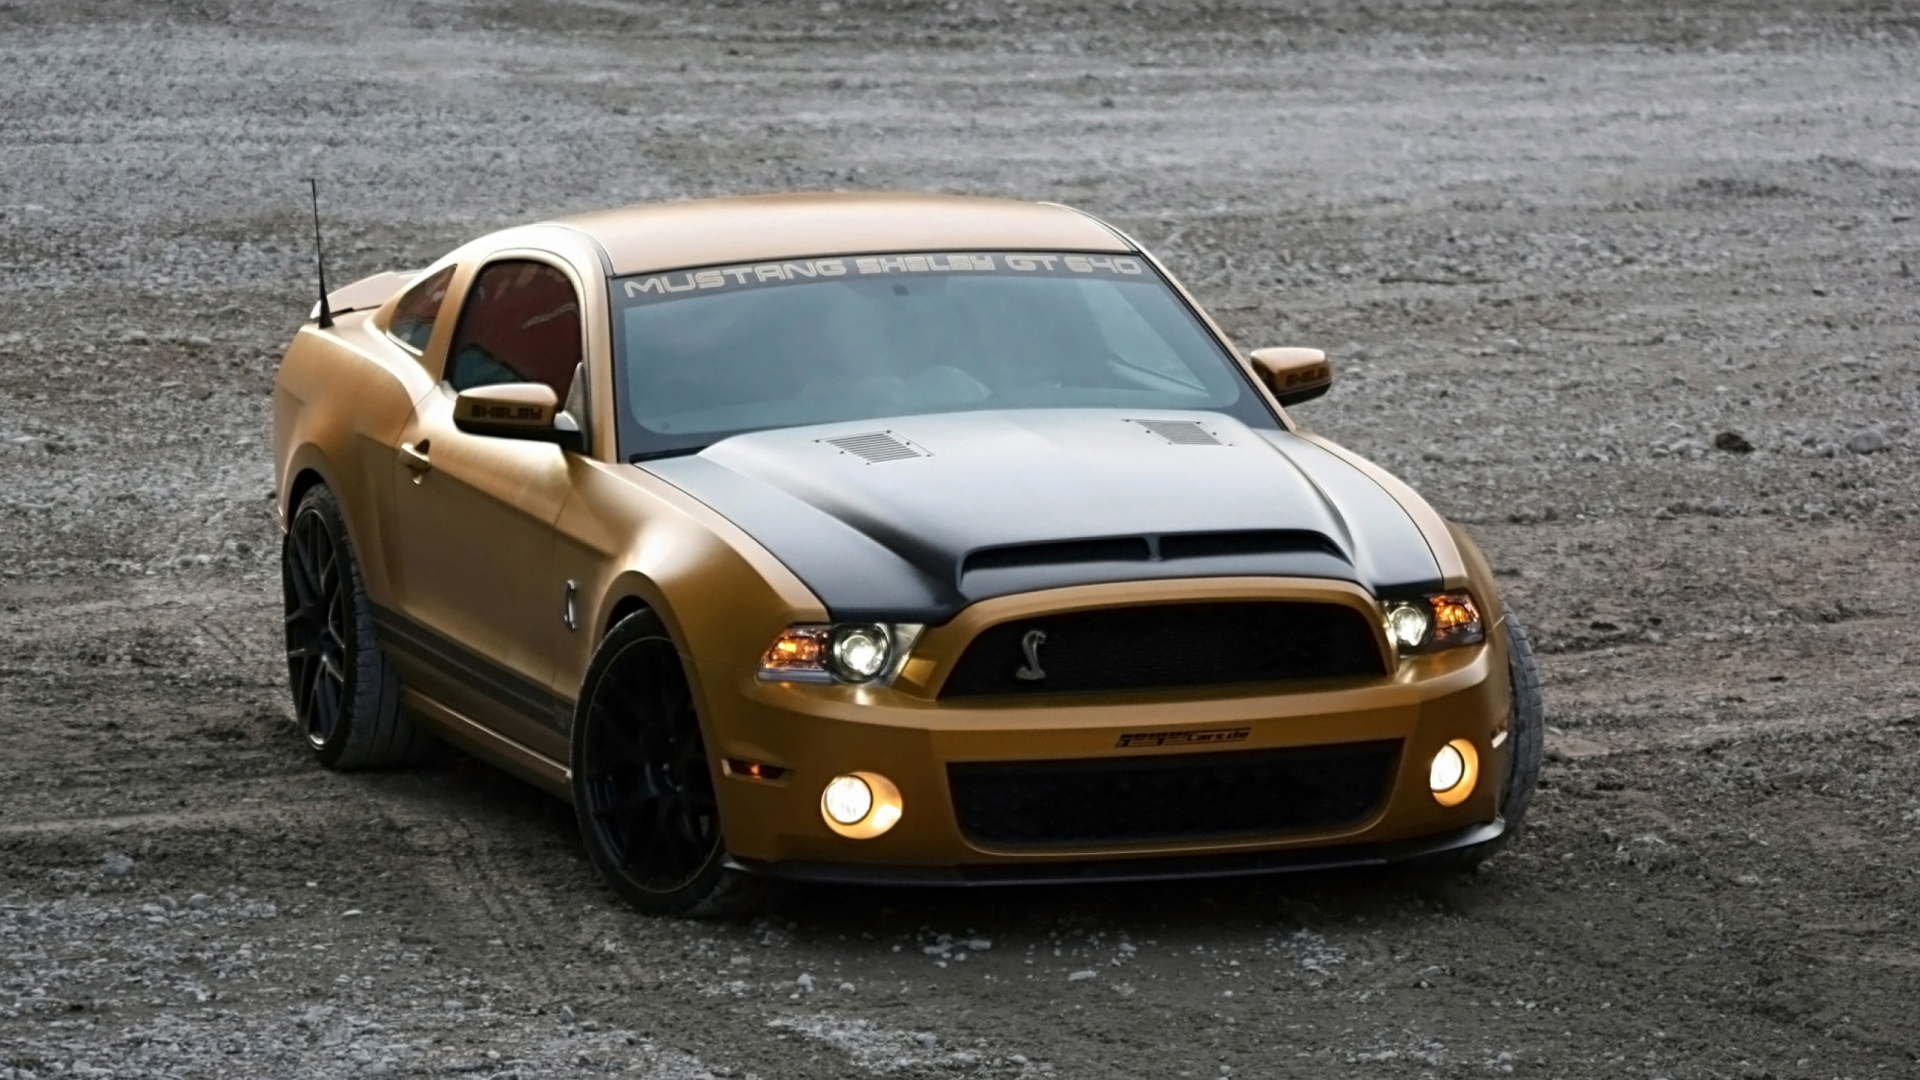 Ford Mustang Shelby GT640 wallpaper 1920x1080